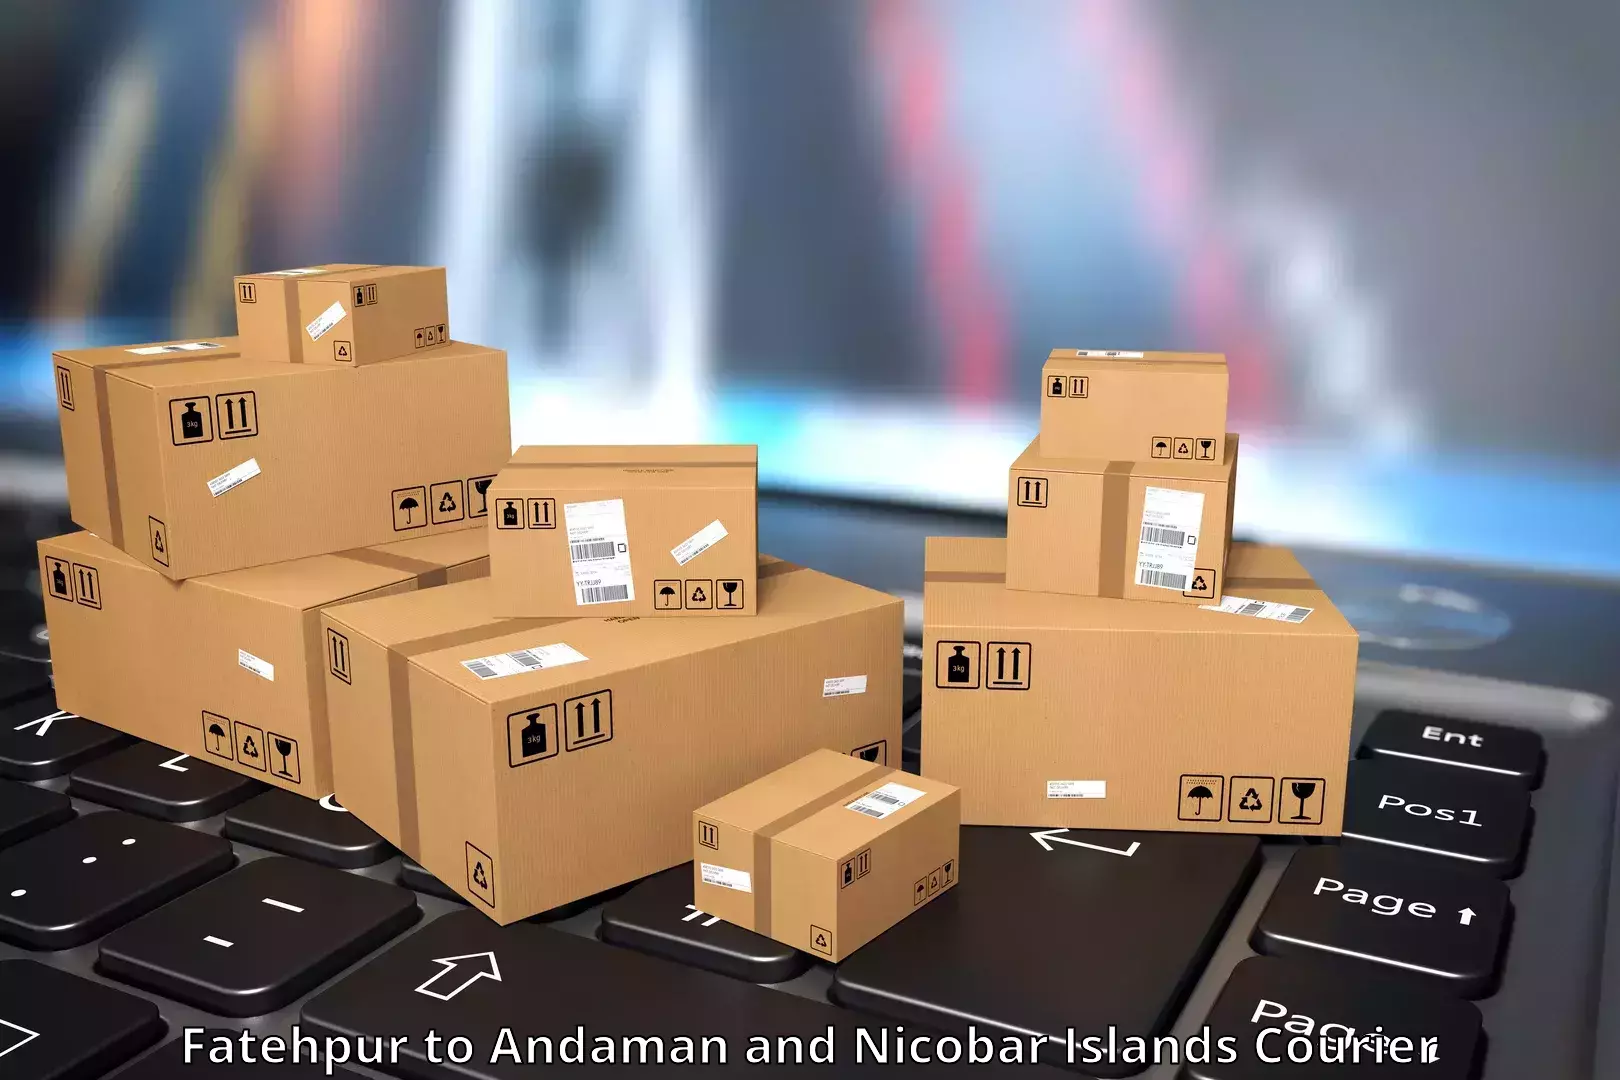 Lightweight parcel options Fatehpur to Andaman and Nicobar Islands